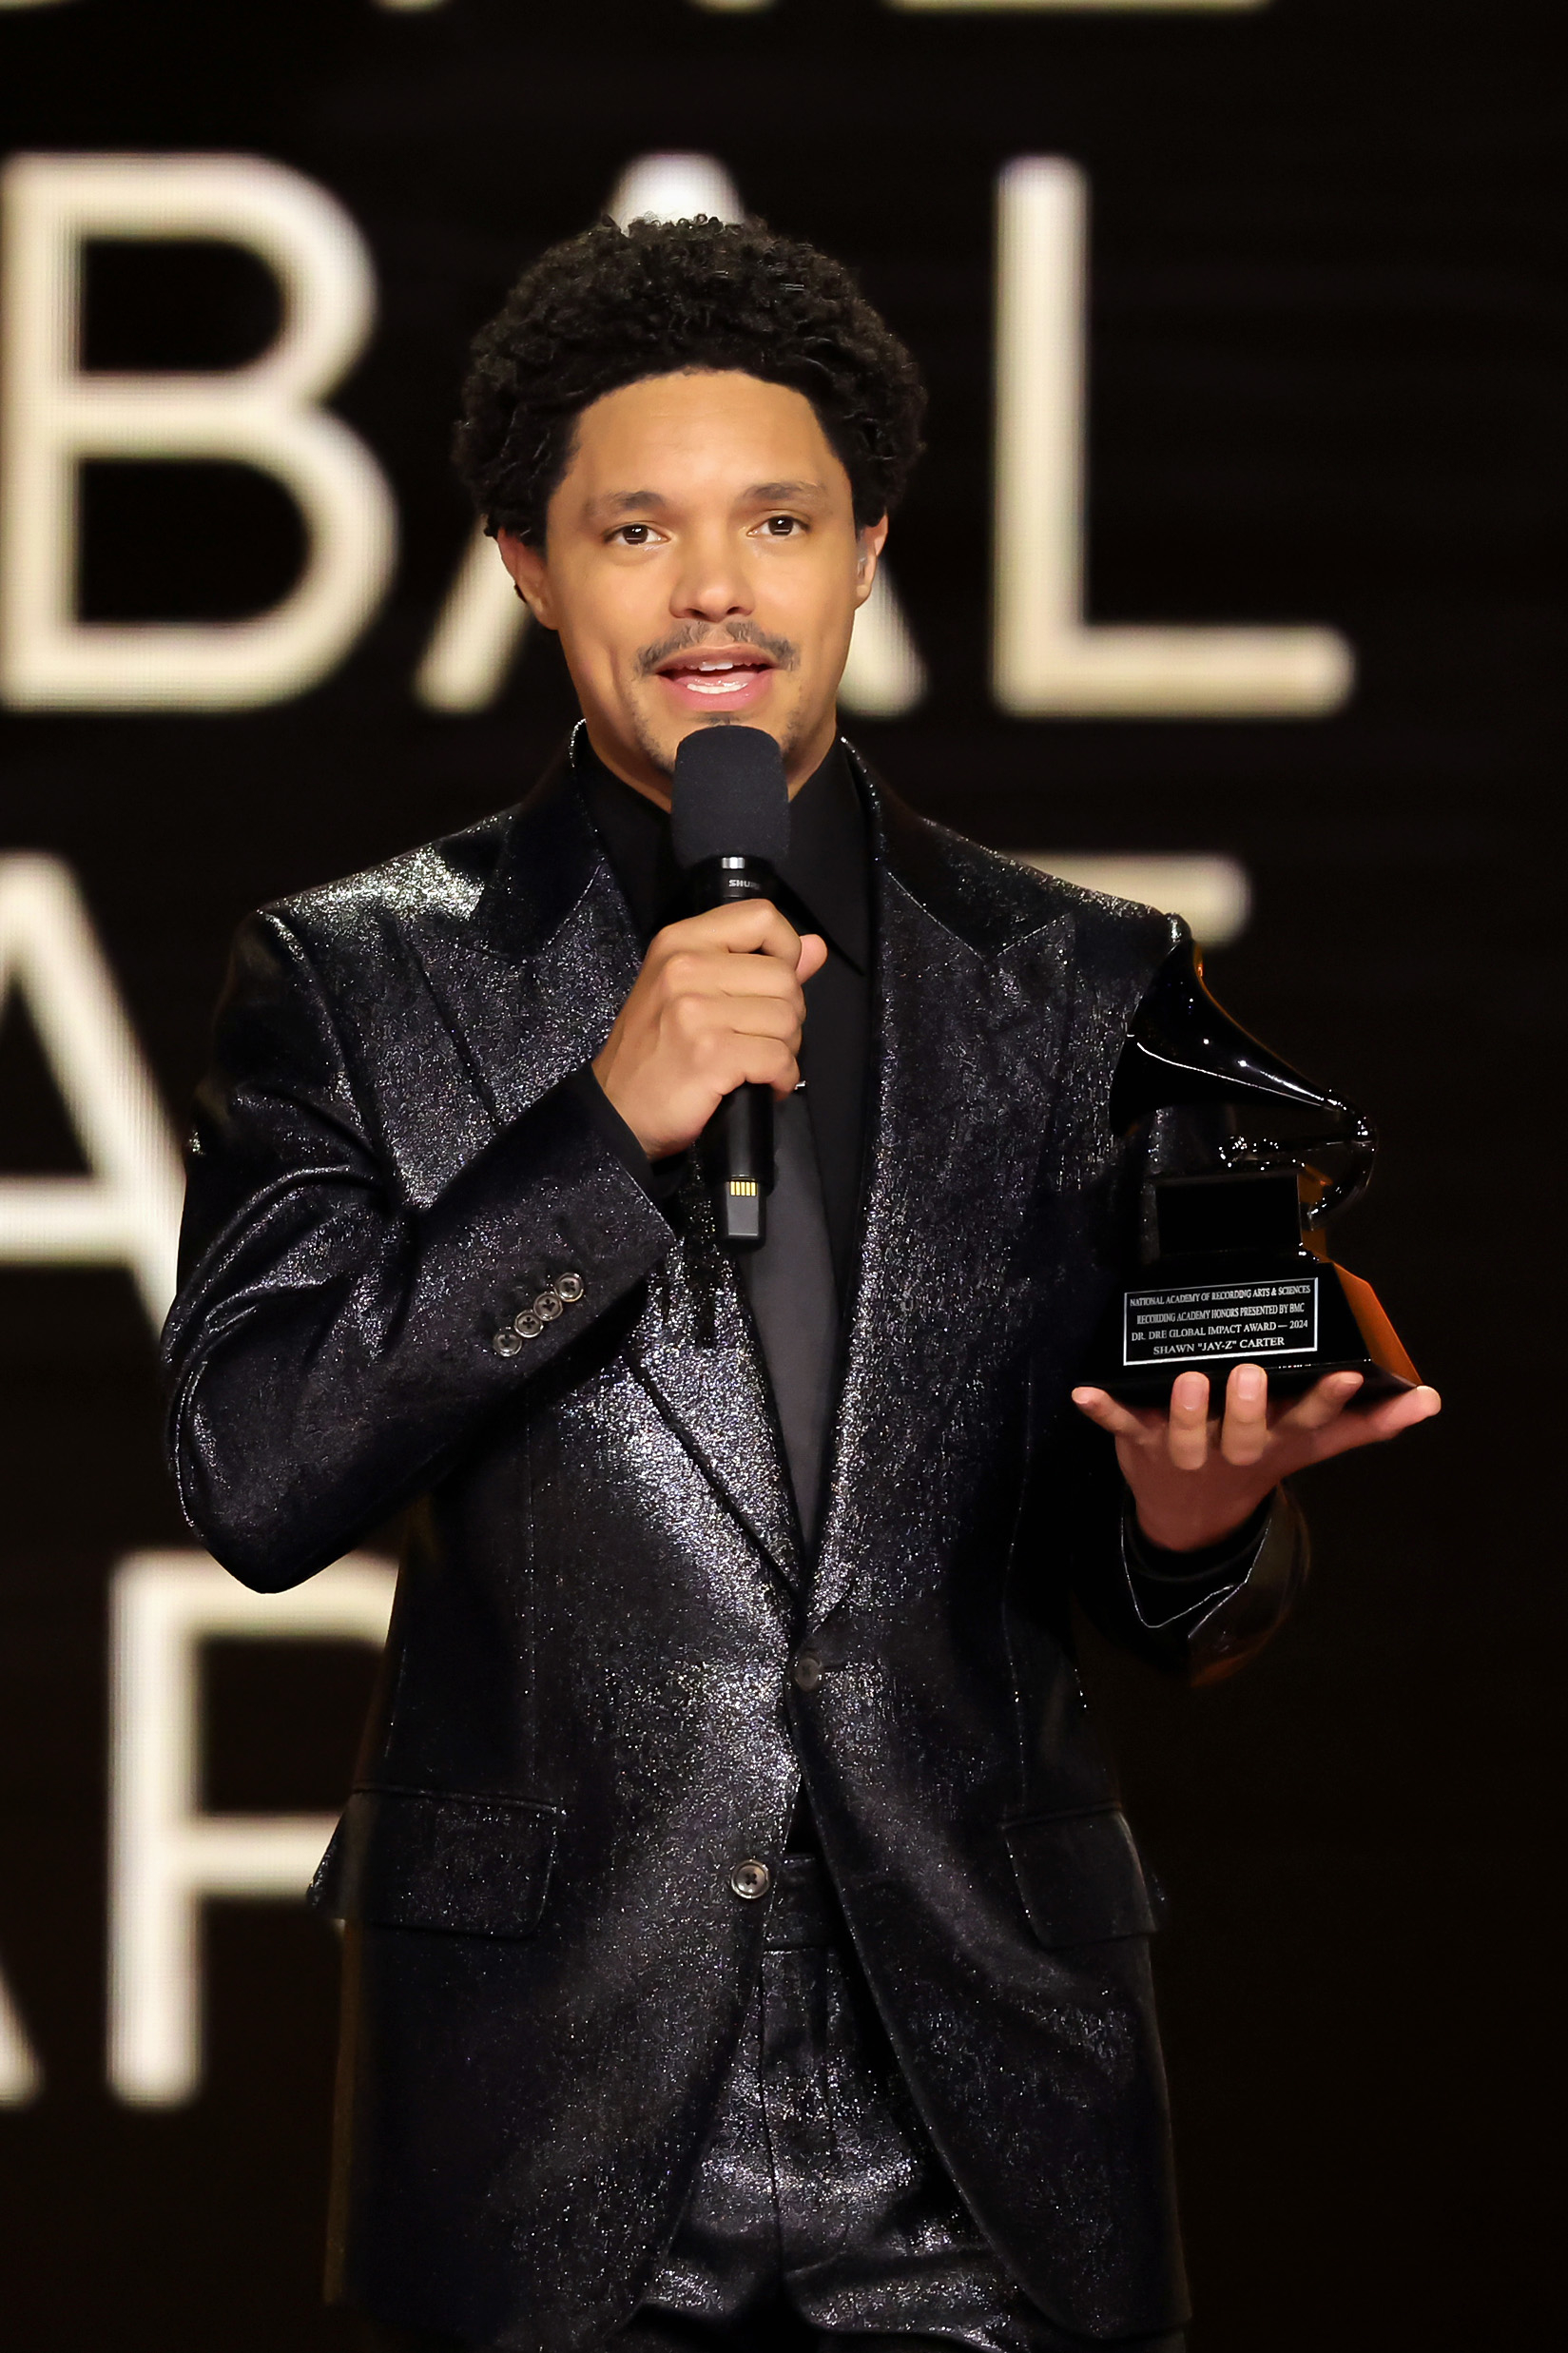 Trevor Noah in a glittery jacket holding a microphone and award on stage